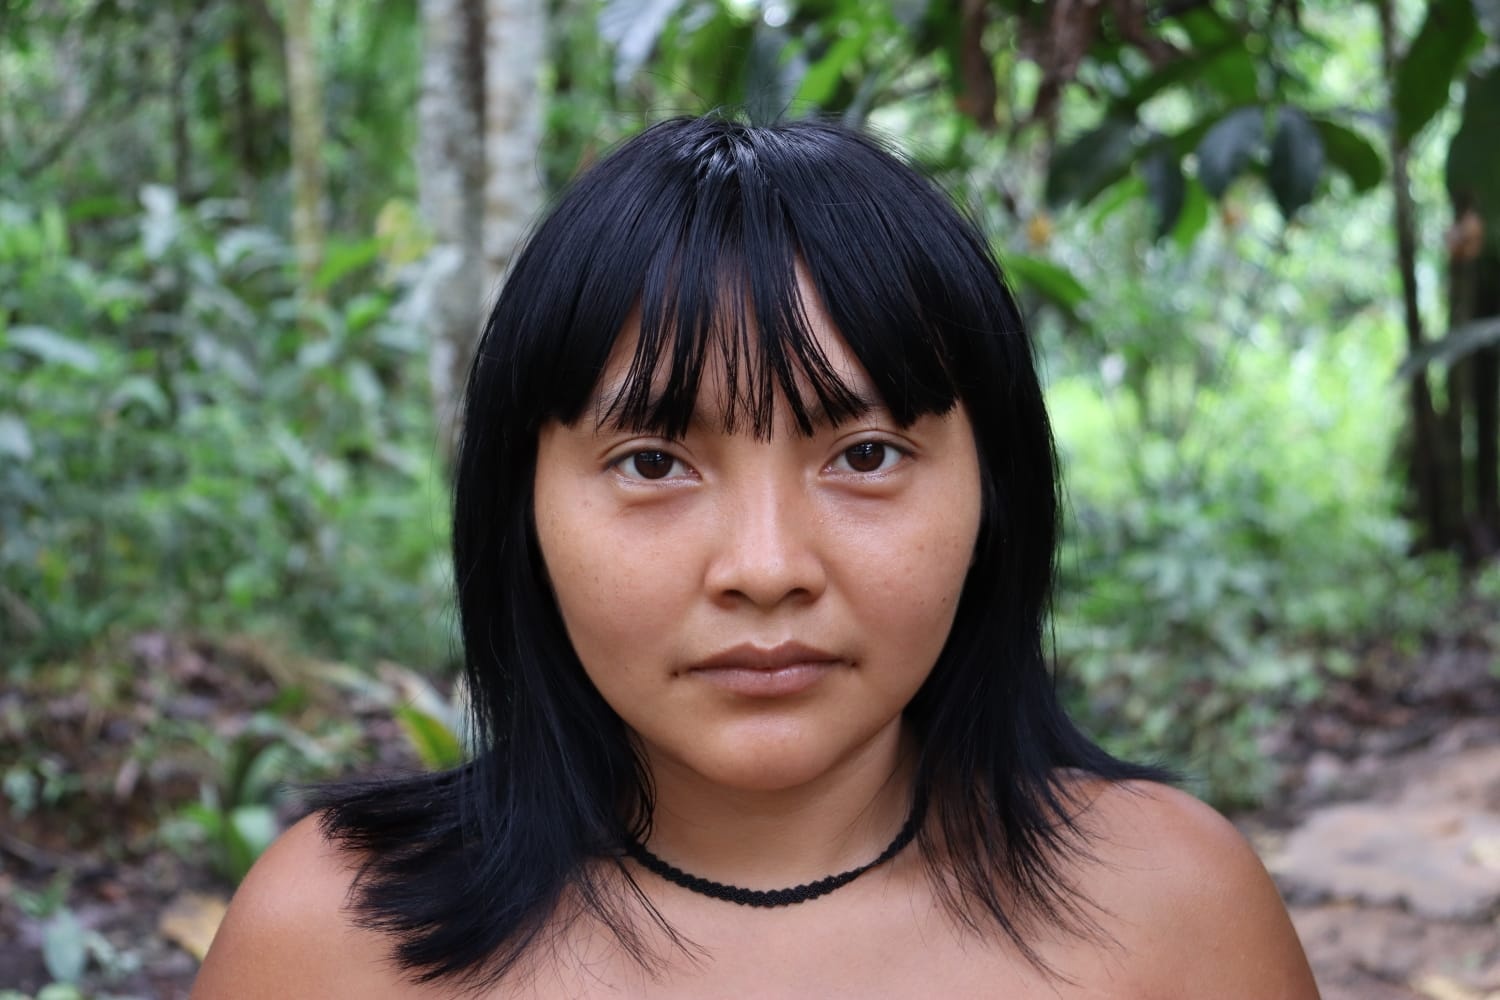 A portrait of artist Aida Harika. An Indigenous Yanomami woman with shoulder-length straight dark hair, Aida wears a thin choker and stands in front of a background of lush green leaves and trees. 